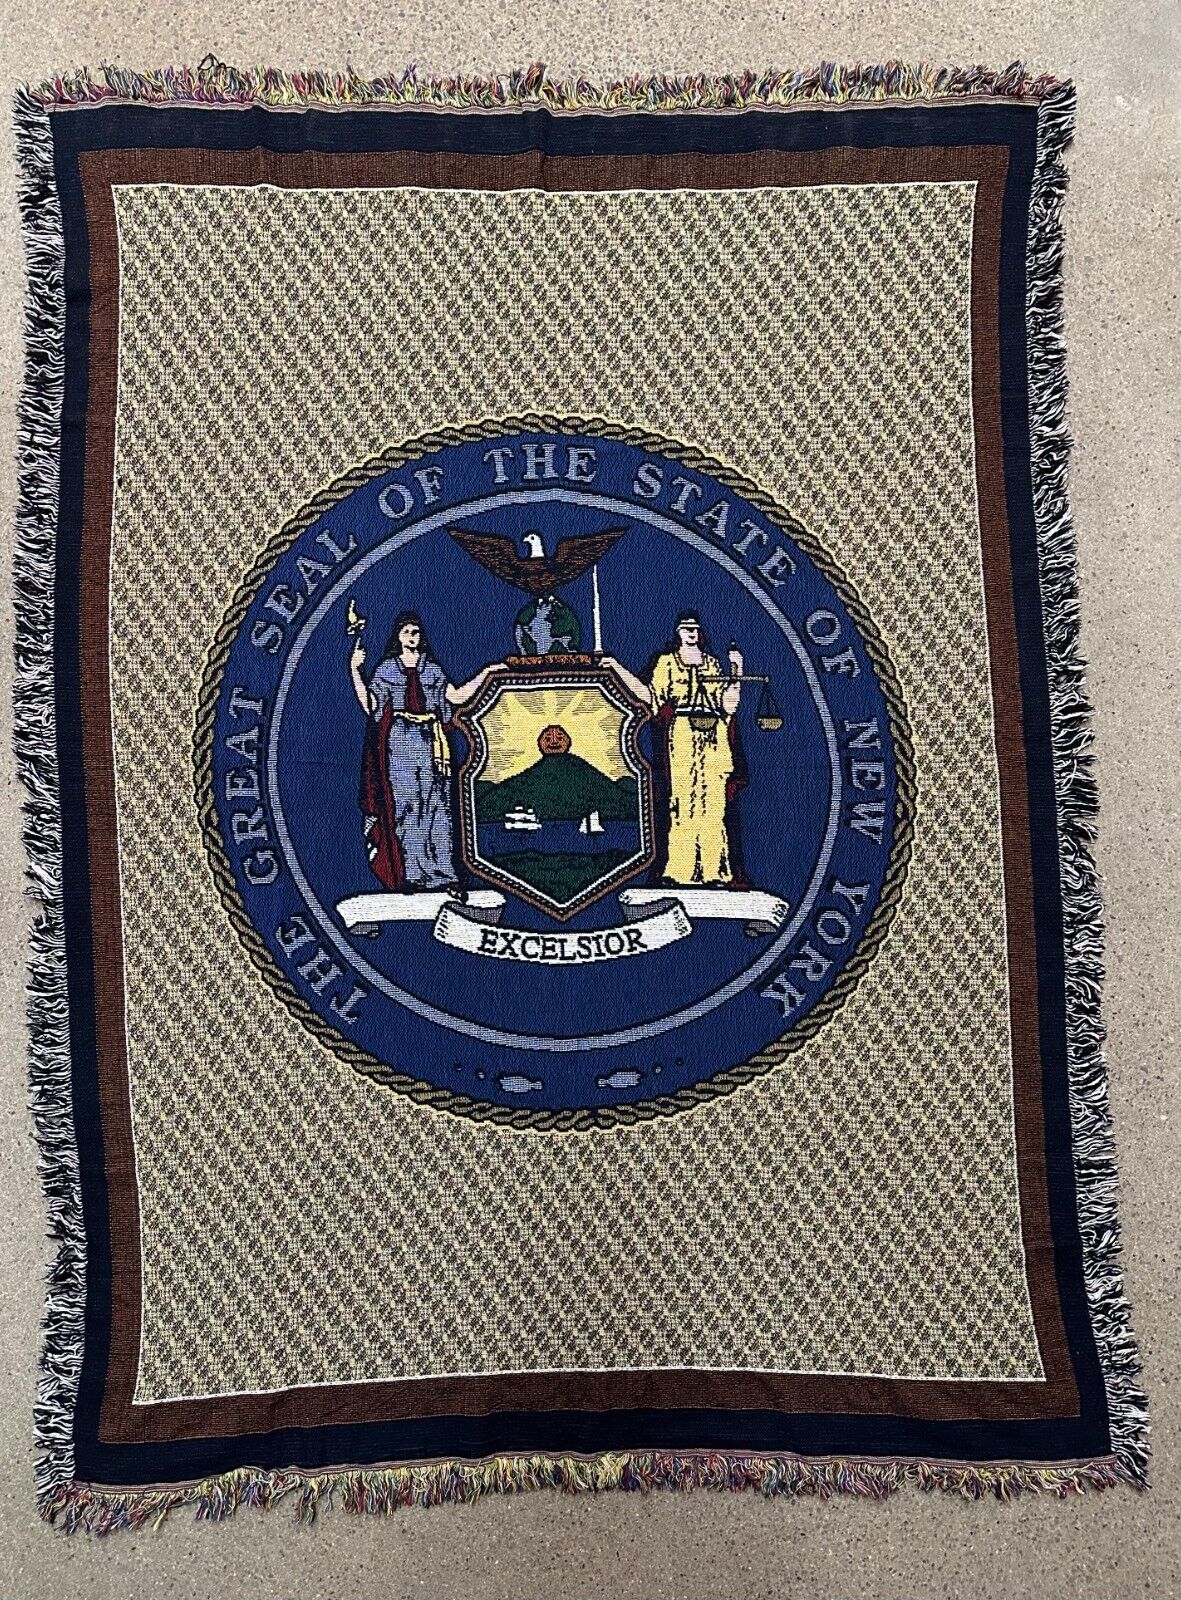 Extremely Rare - The Great Seal of the State of New York (Hand Woven Blanket)